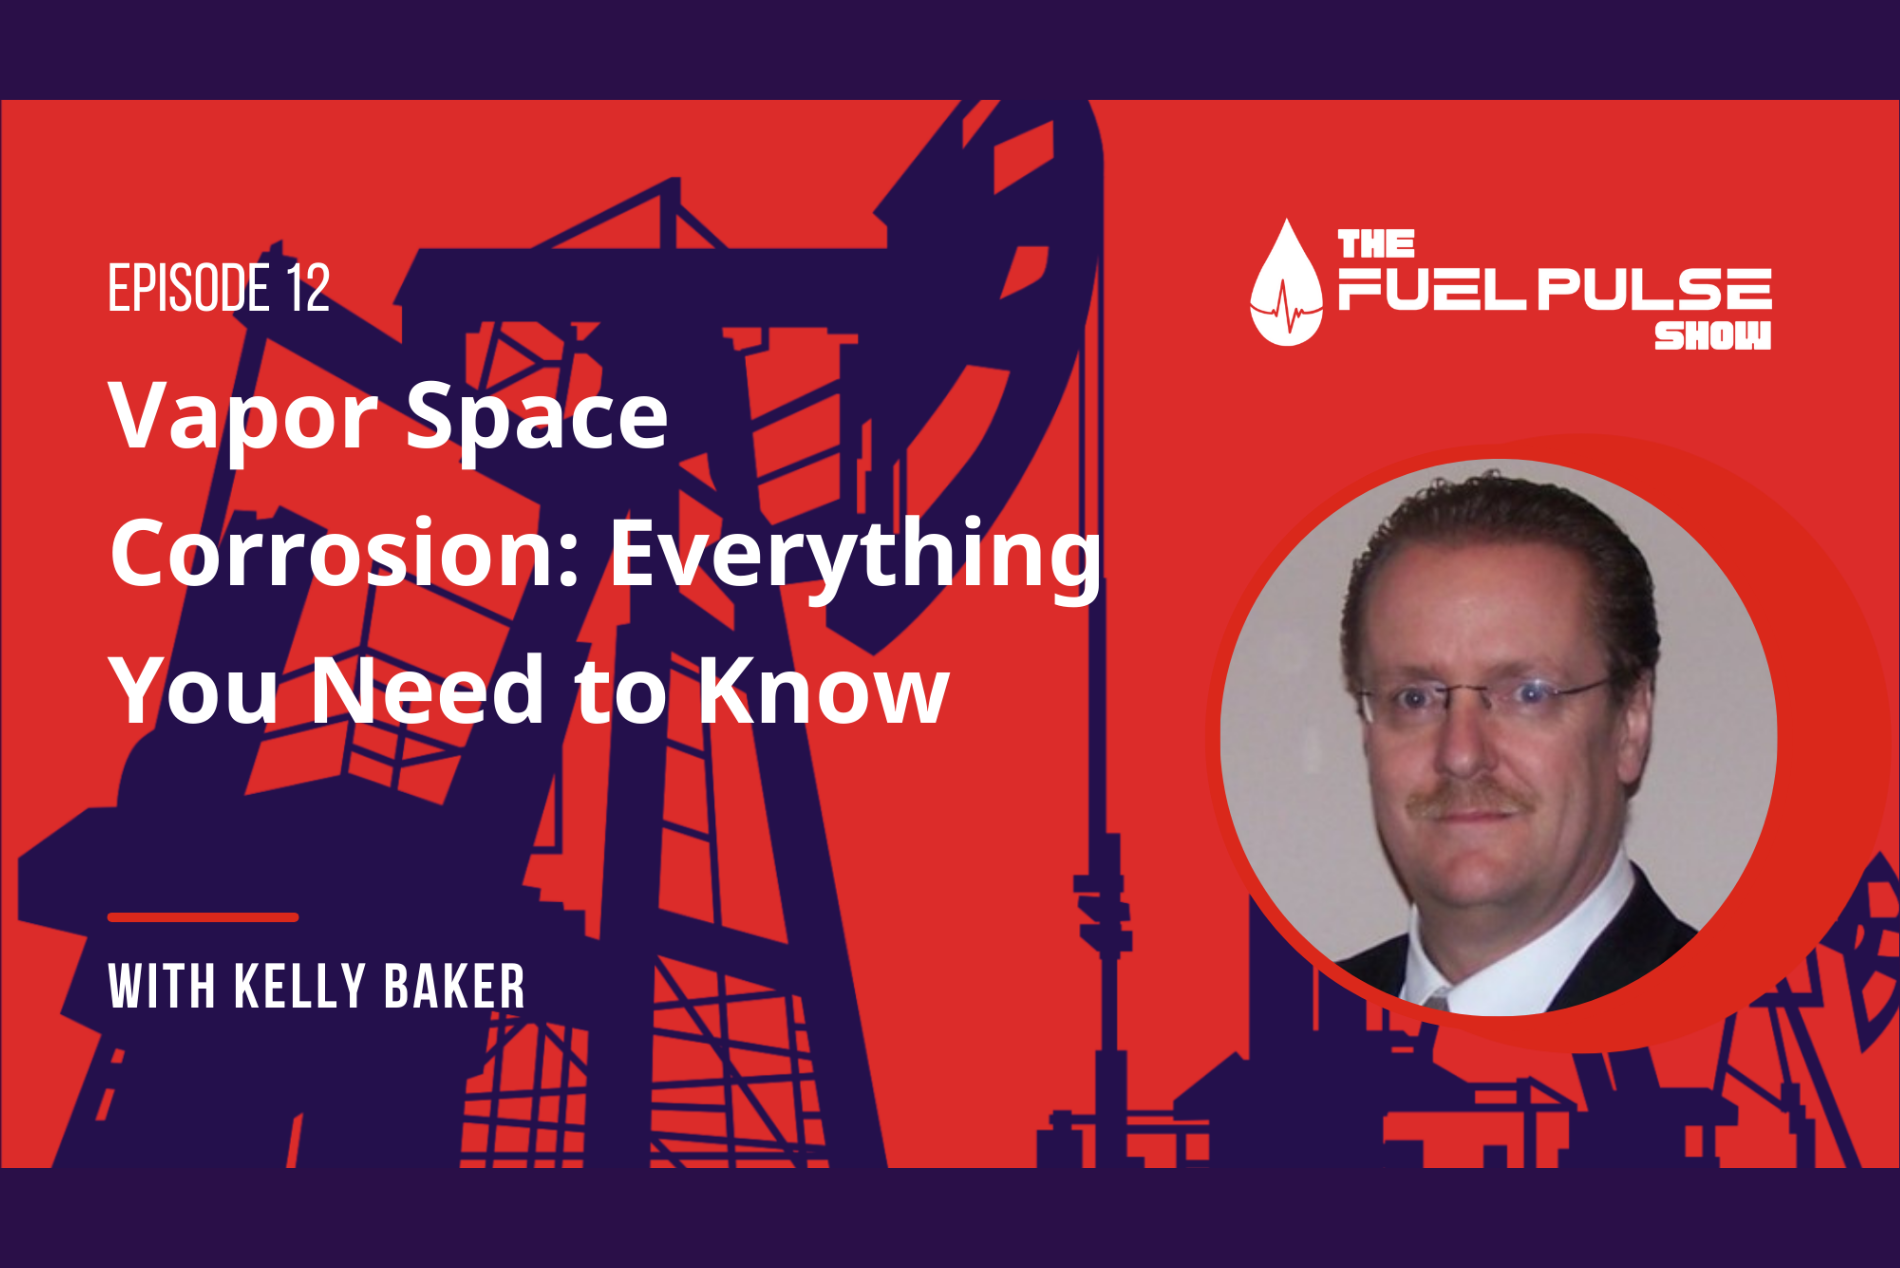 Episode 012 - Vapor Space Corrosion: Everything You Need To Know With Kelly Baker